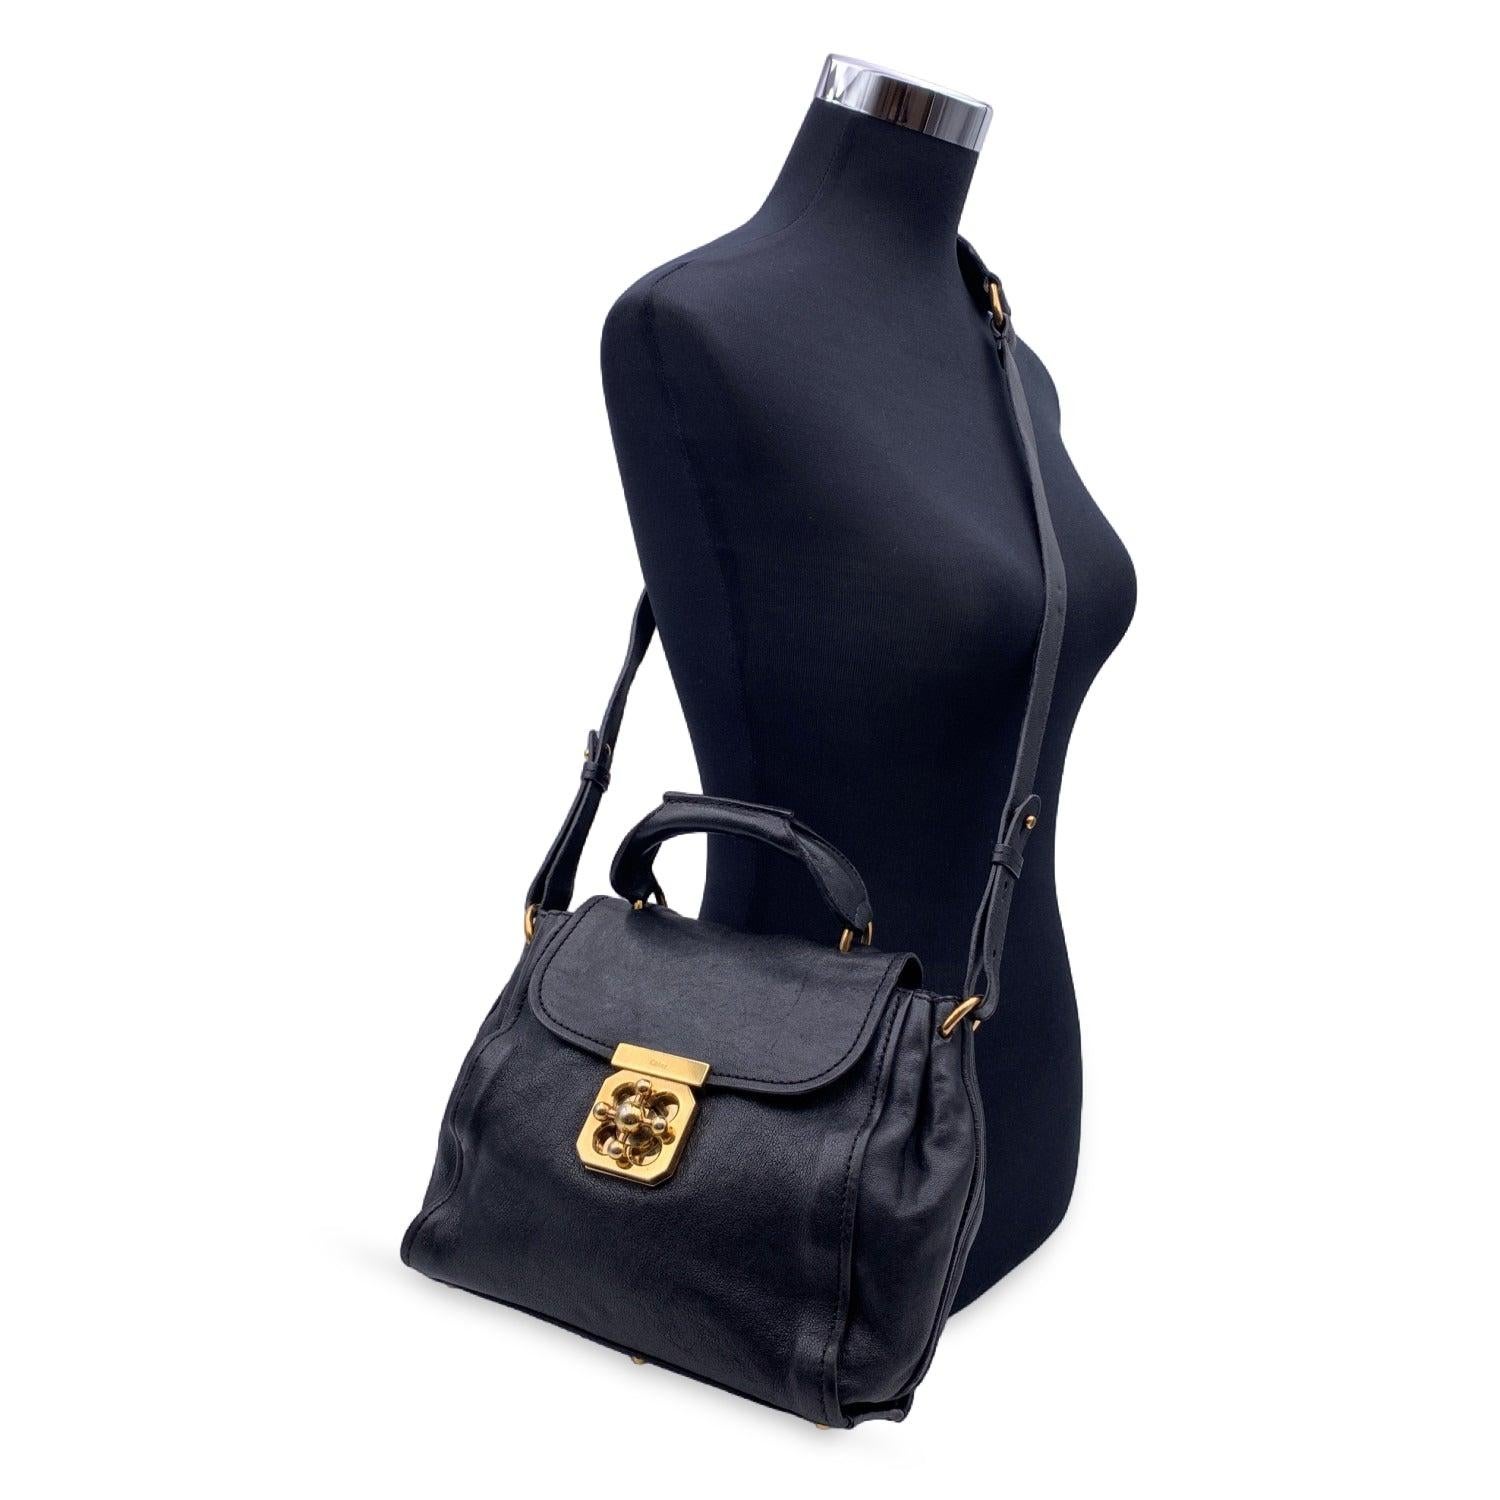 Gorgeous CHLOE 'Elsie ' crafted in genuine leather in black color. Gold metal hardware. Flap with twist closure on the front. 1 rear zip pocket. The interior is done in canvas textile and includes 1 smaller open pocket inside. 'CHLOE' embossed on